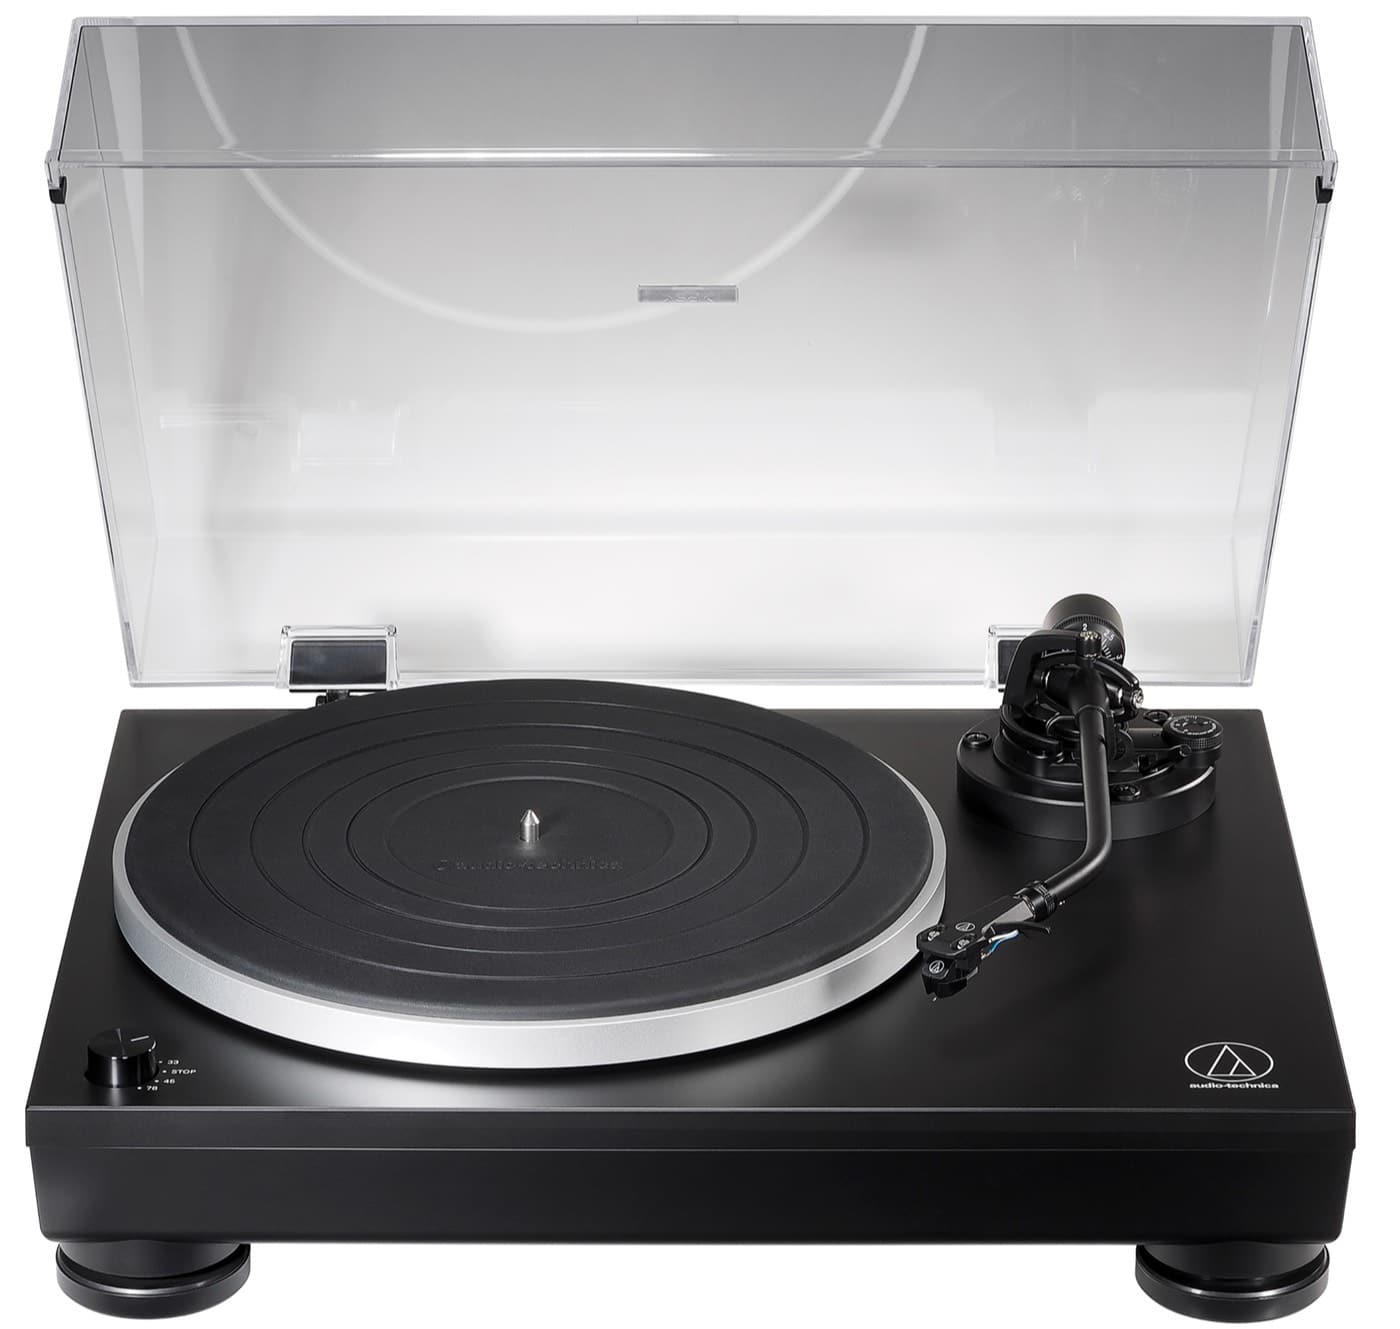 AT-LP5x Turntable From Audio-Technica